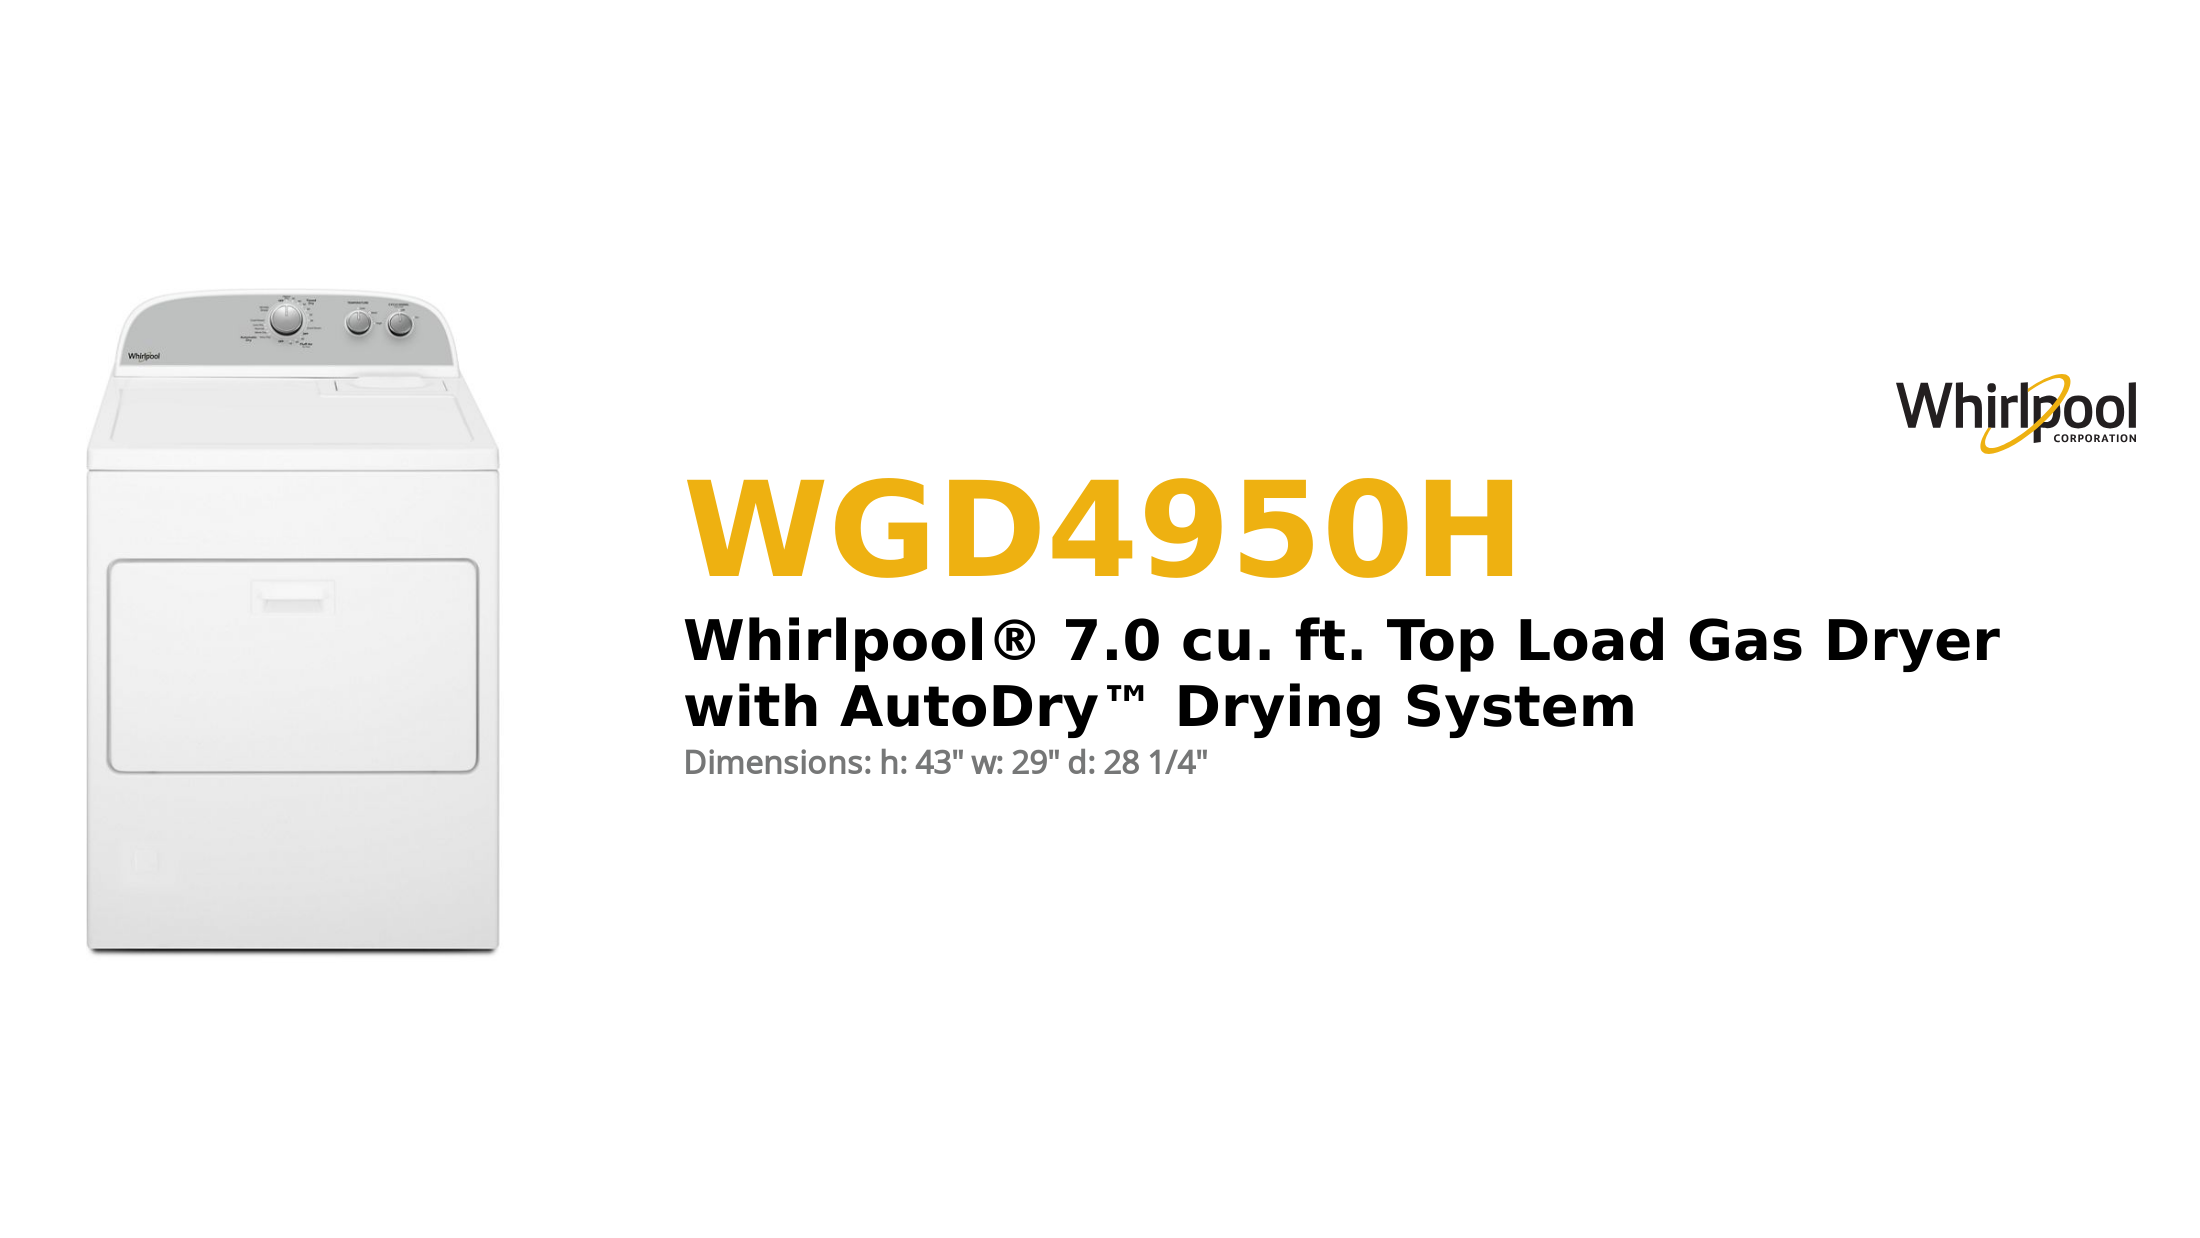 Whirlpool® 7.0 cu. ft. Top Load Gas Dryer with AutoDry™ Drying System